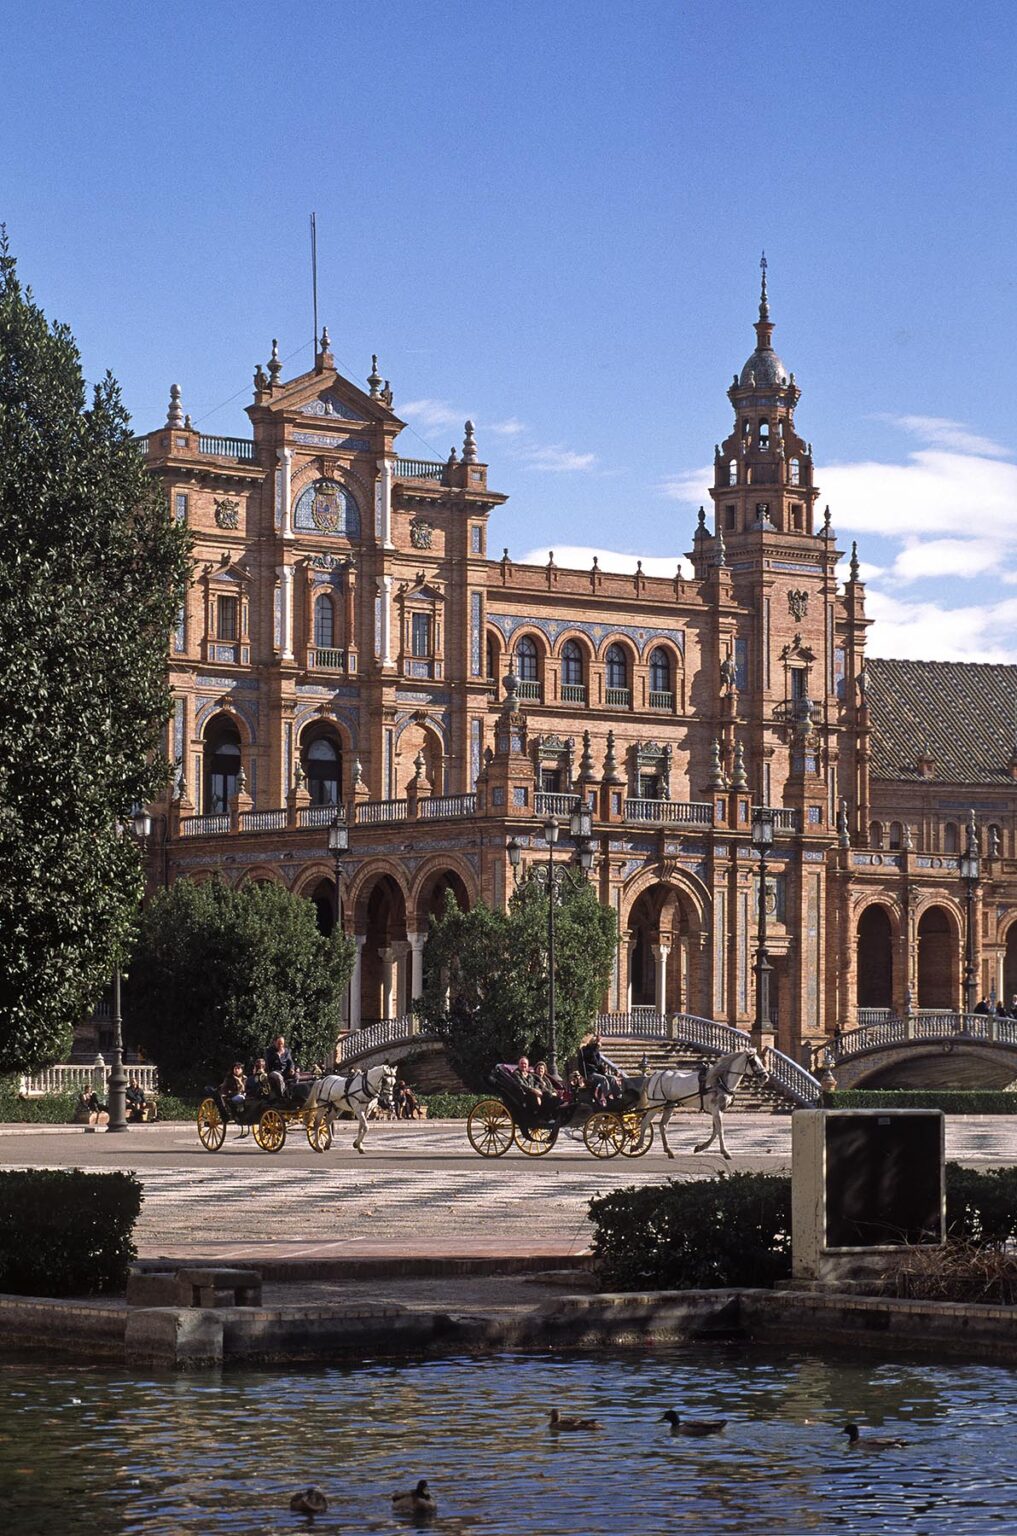 CARRIAGE RIDES are available at the PLAZA DE ESPANA which was built for the 1929 WORLD FAIR - SEVILLA, SPAIN